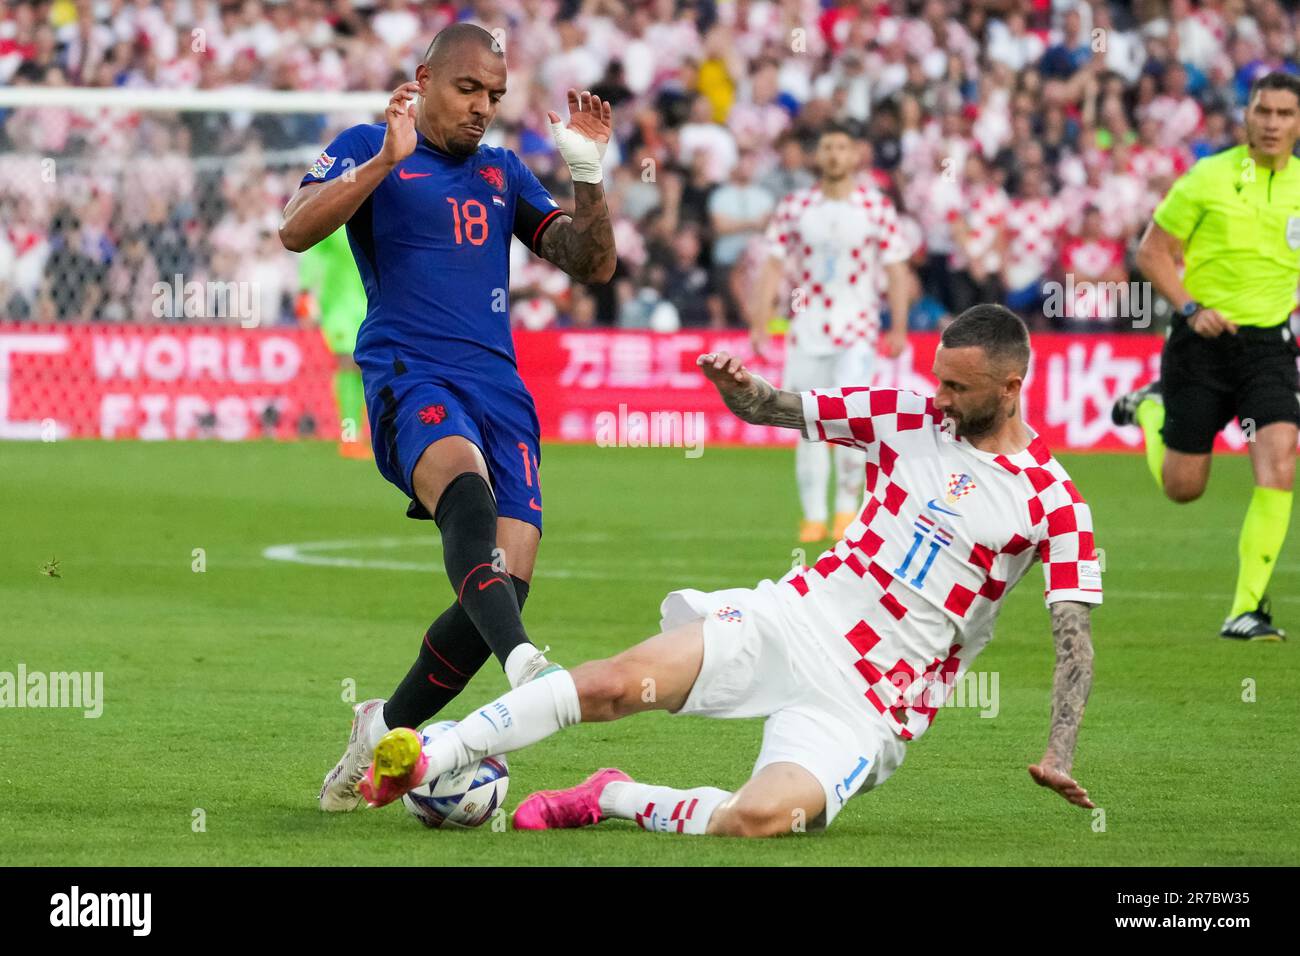 Rotterdam, Netherlands. 14th June, 2023. Rotterdam - Donyell Malen of Holland, Marcelo Brozovic of Croatia during the match between Netherlands v Croatia at Stadion Feijenoord De Kuip on 14 June 2023 in Rotterdam, Netherlands. Credit: box to box pictures/Alamy Live News Stock Photo